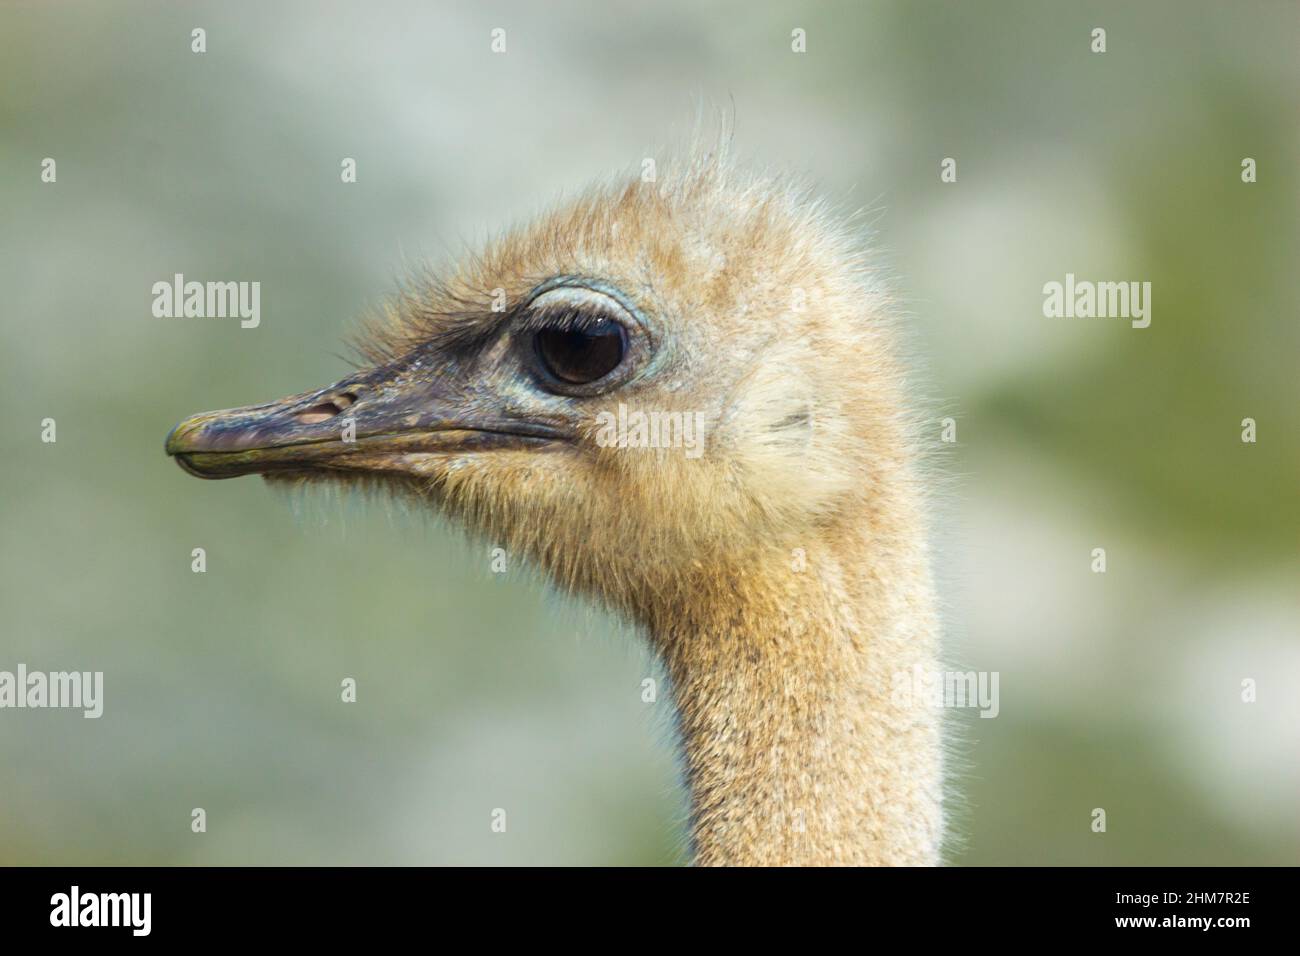 Head of a common ostrich at the Cape of Good Hope in the Western Cape of South Africa Stock Photo